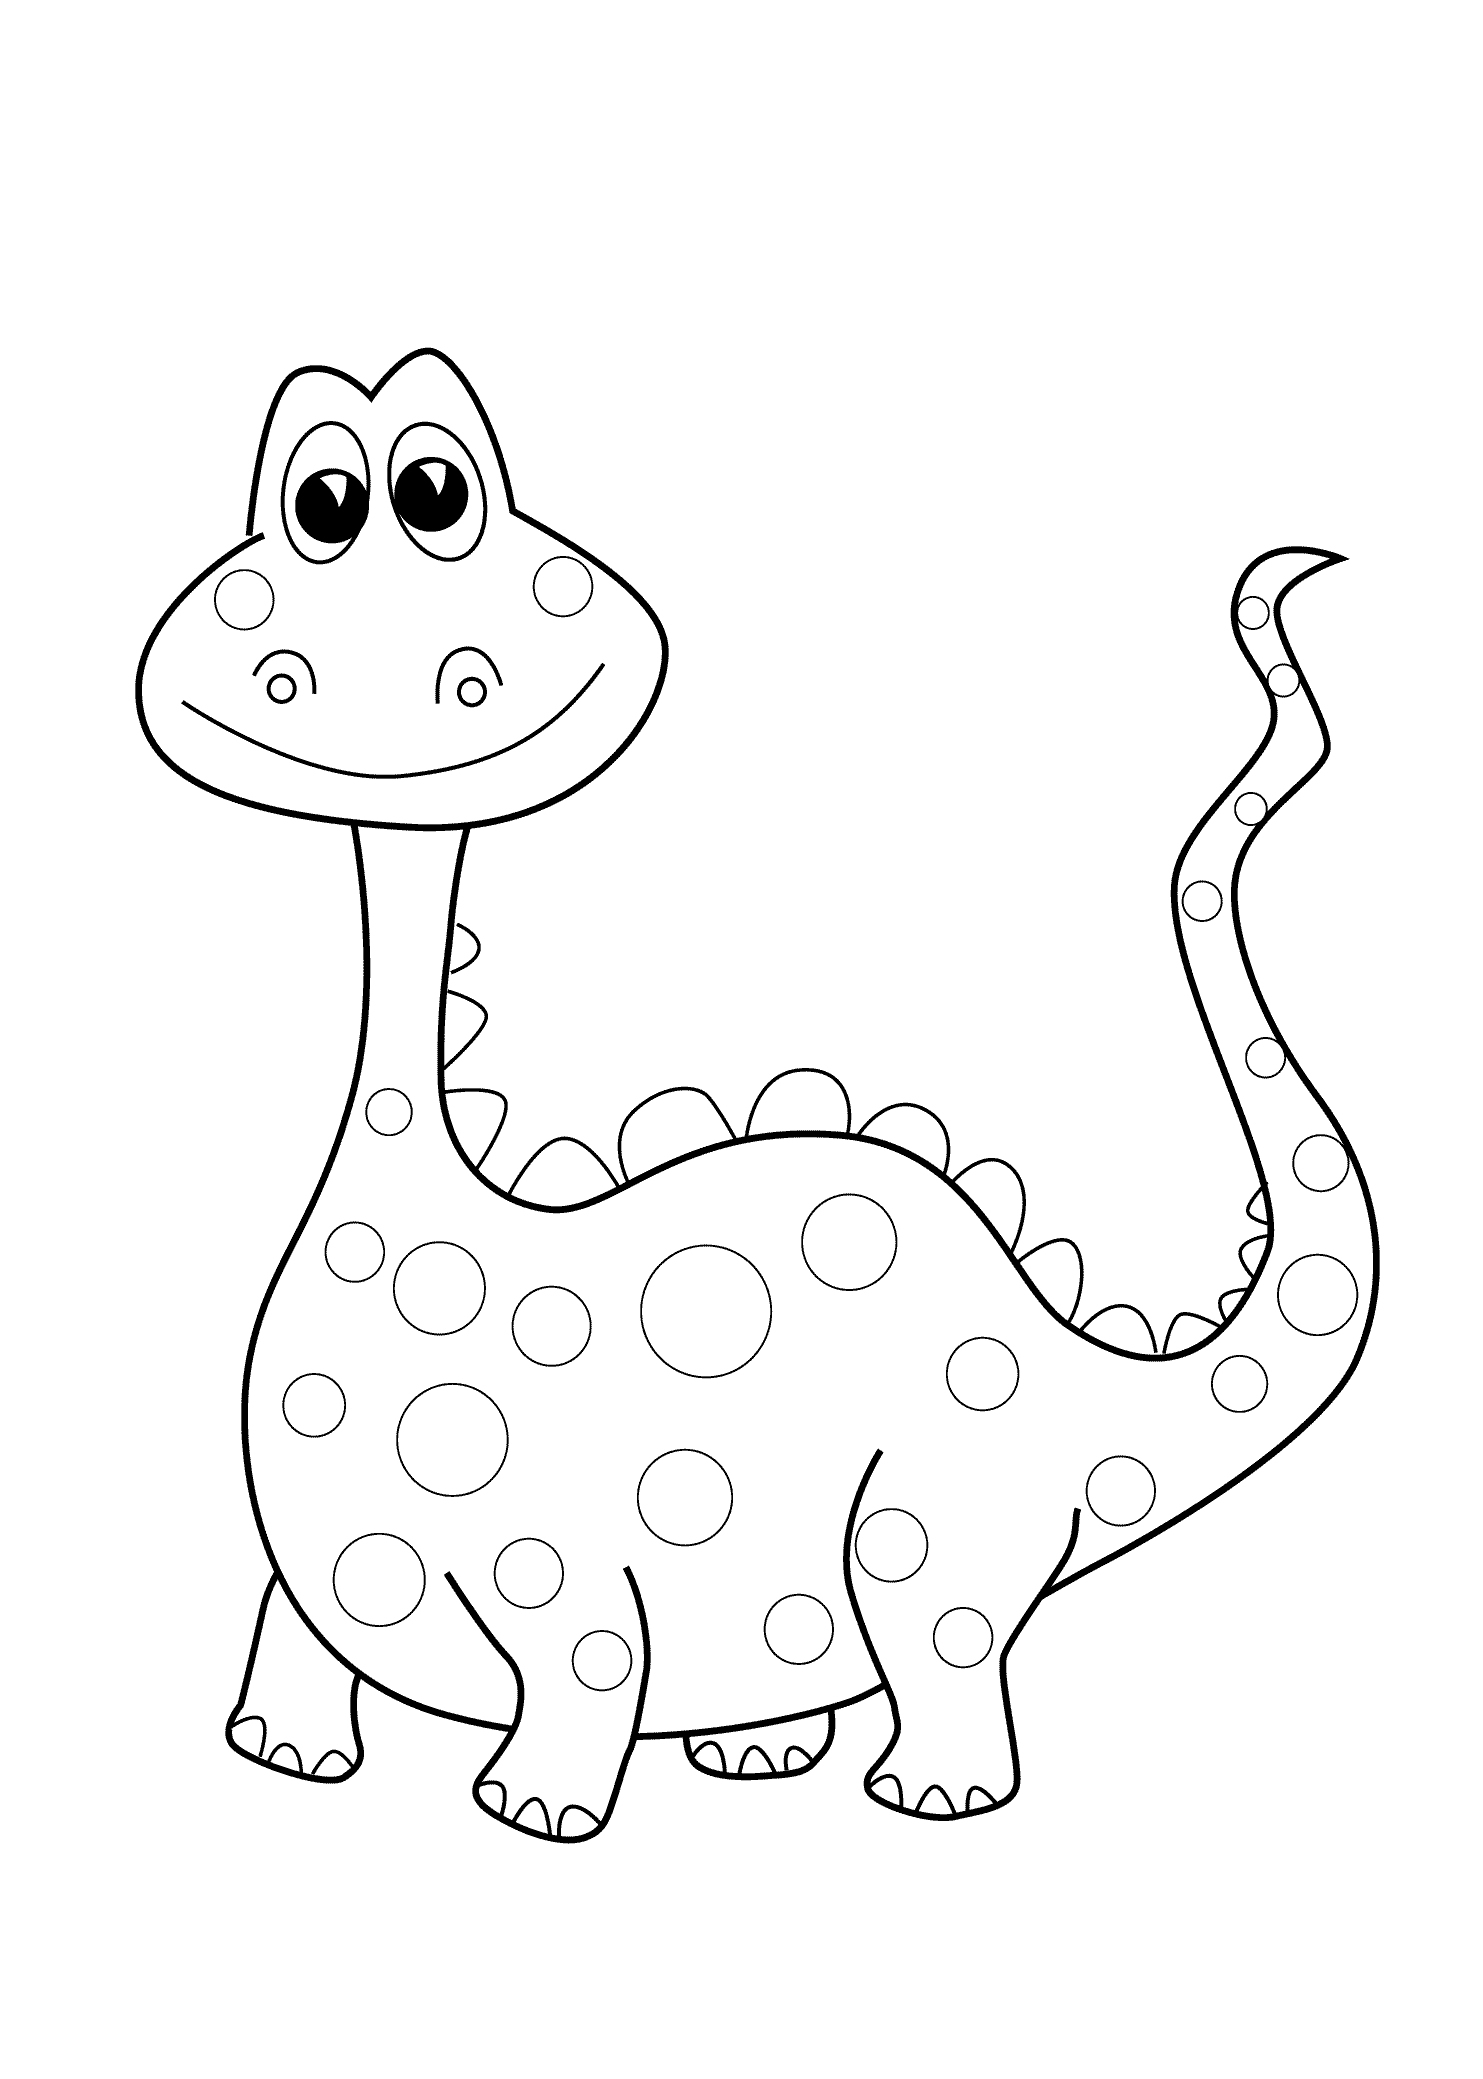 Coloring Pages : Free Printable Coloring Pages For Preschoolers - Free Printable Coloring Pages For Preschoolers